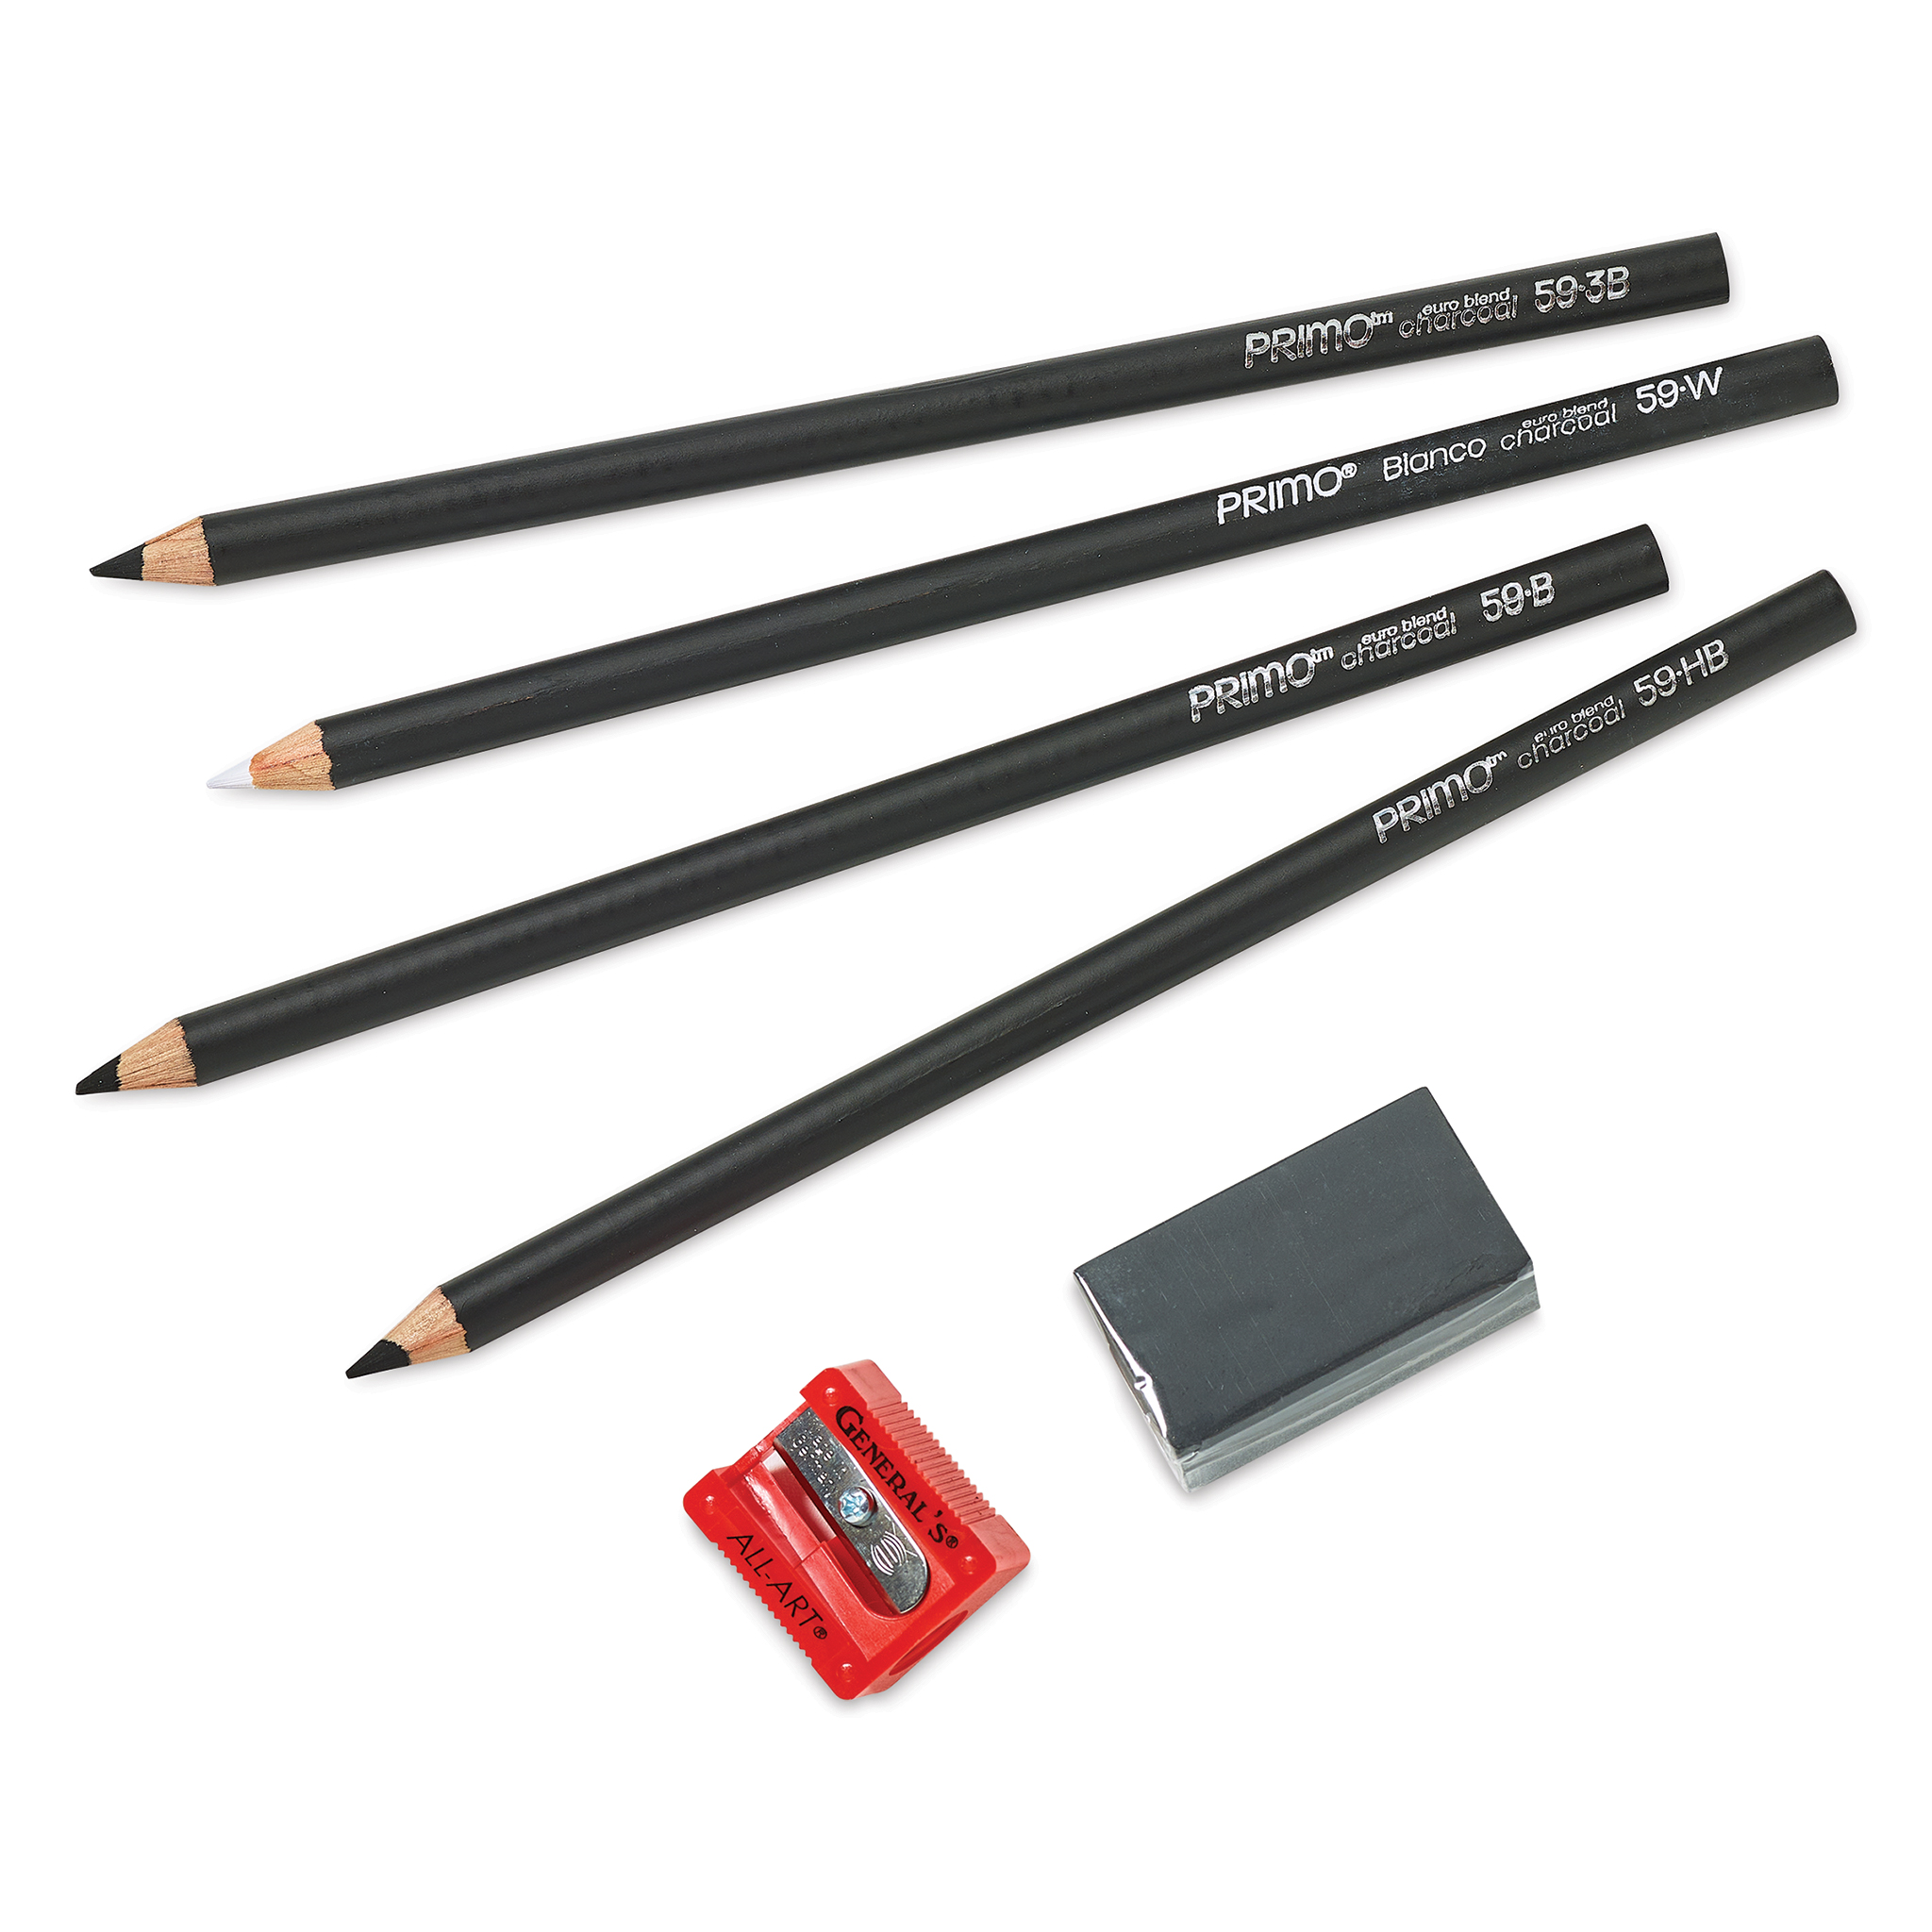 General's Primo Euro Charcoal Pencil - HB